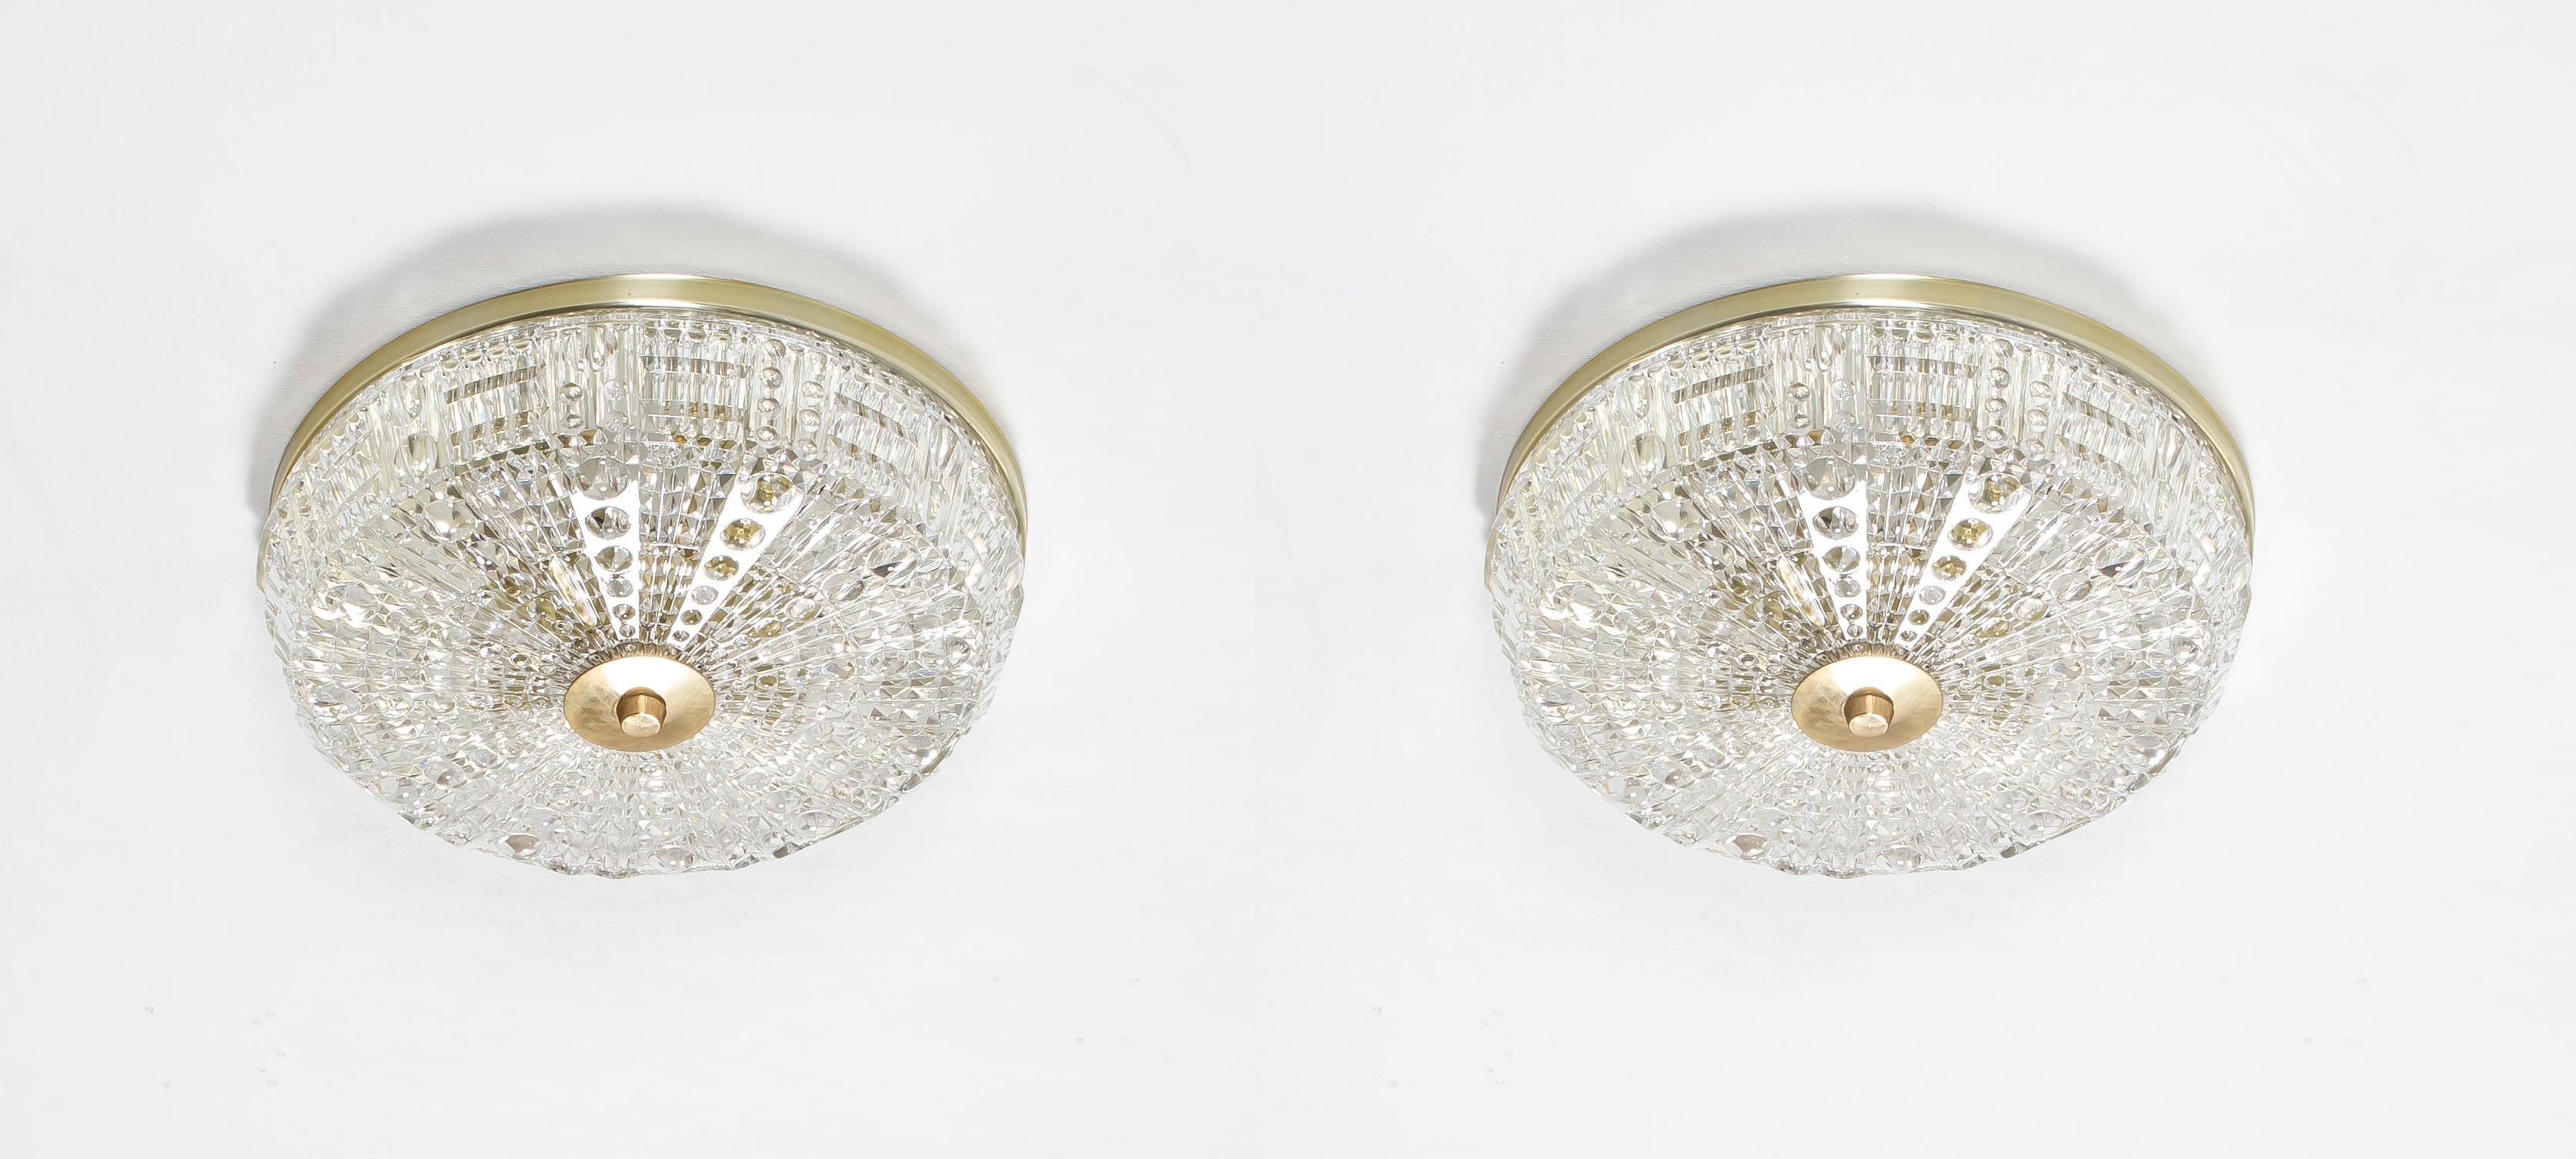 Wonderful and decorative flush mount ceiling lamps in crystal glass and base in brass. Designed by Carl Fagerlund and made by Orrefors from circa 1970s second half. Both lights are working and in very good vintage condition. They are each fitted